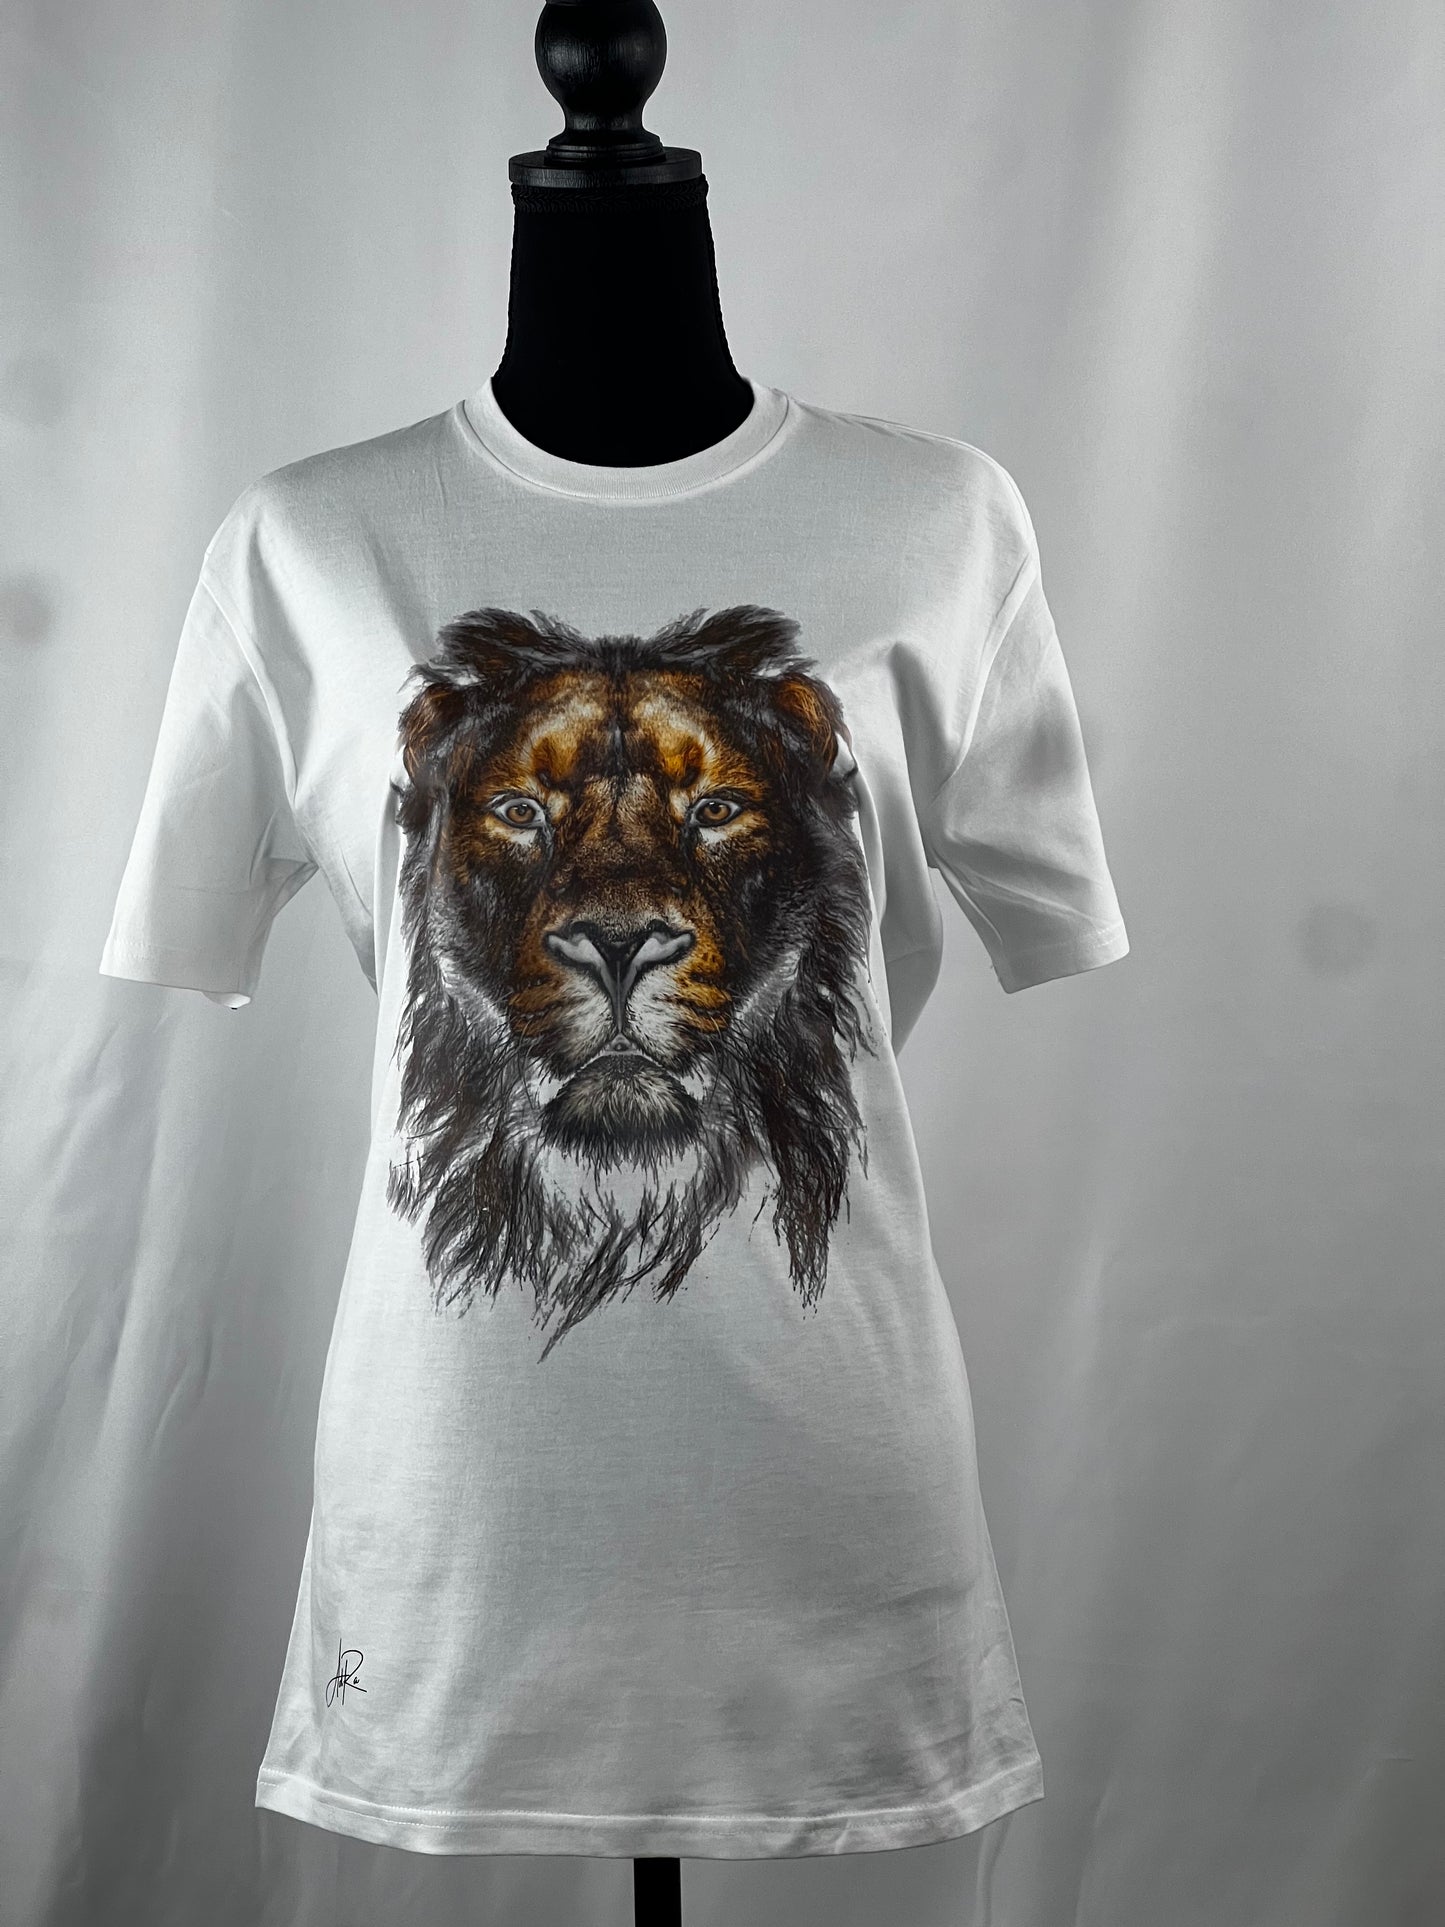 Make a Statement with Our Majestic Lion Head Graphic White T-Shirt | Adra Apparel